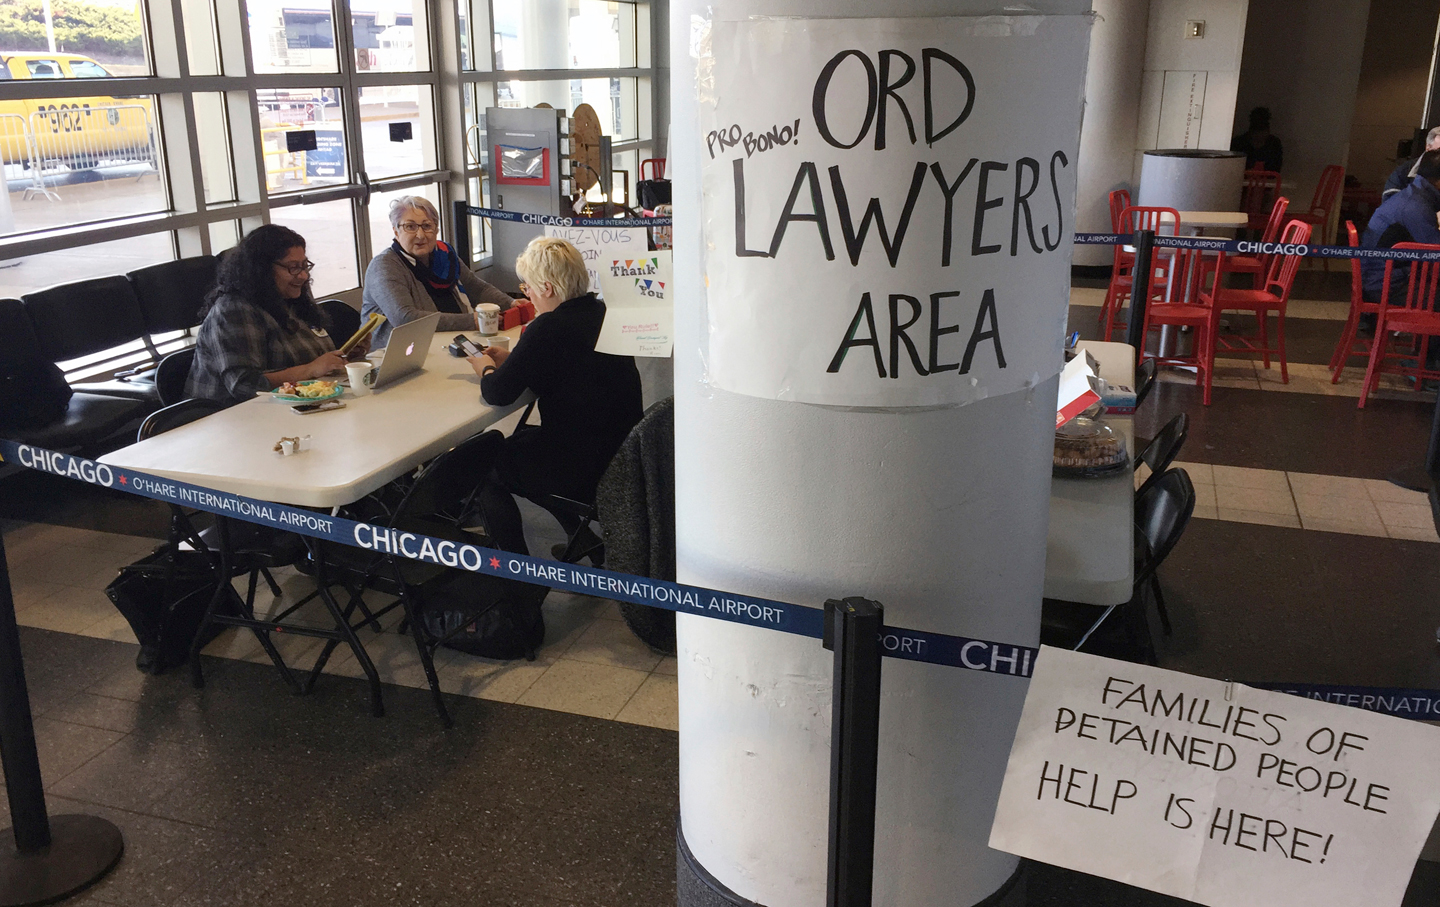 The Airport Lawyers Who Stood Up to Trump Are Under Attack